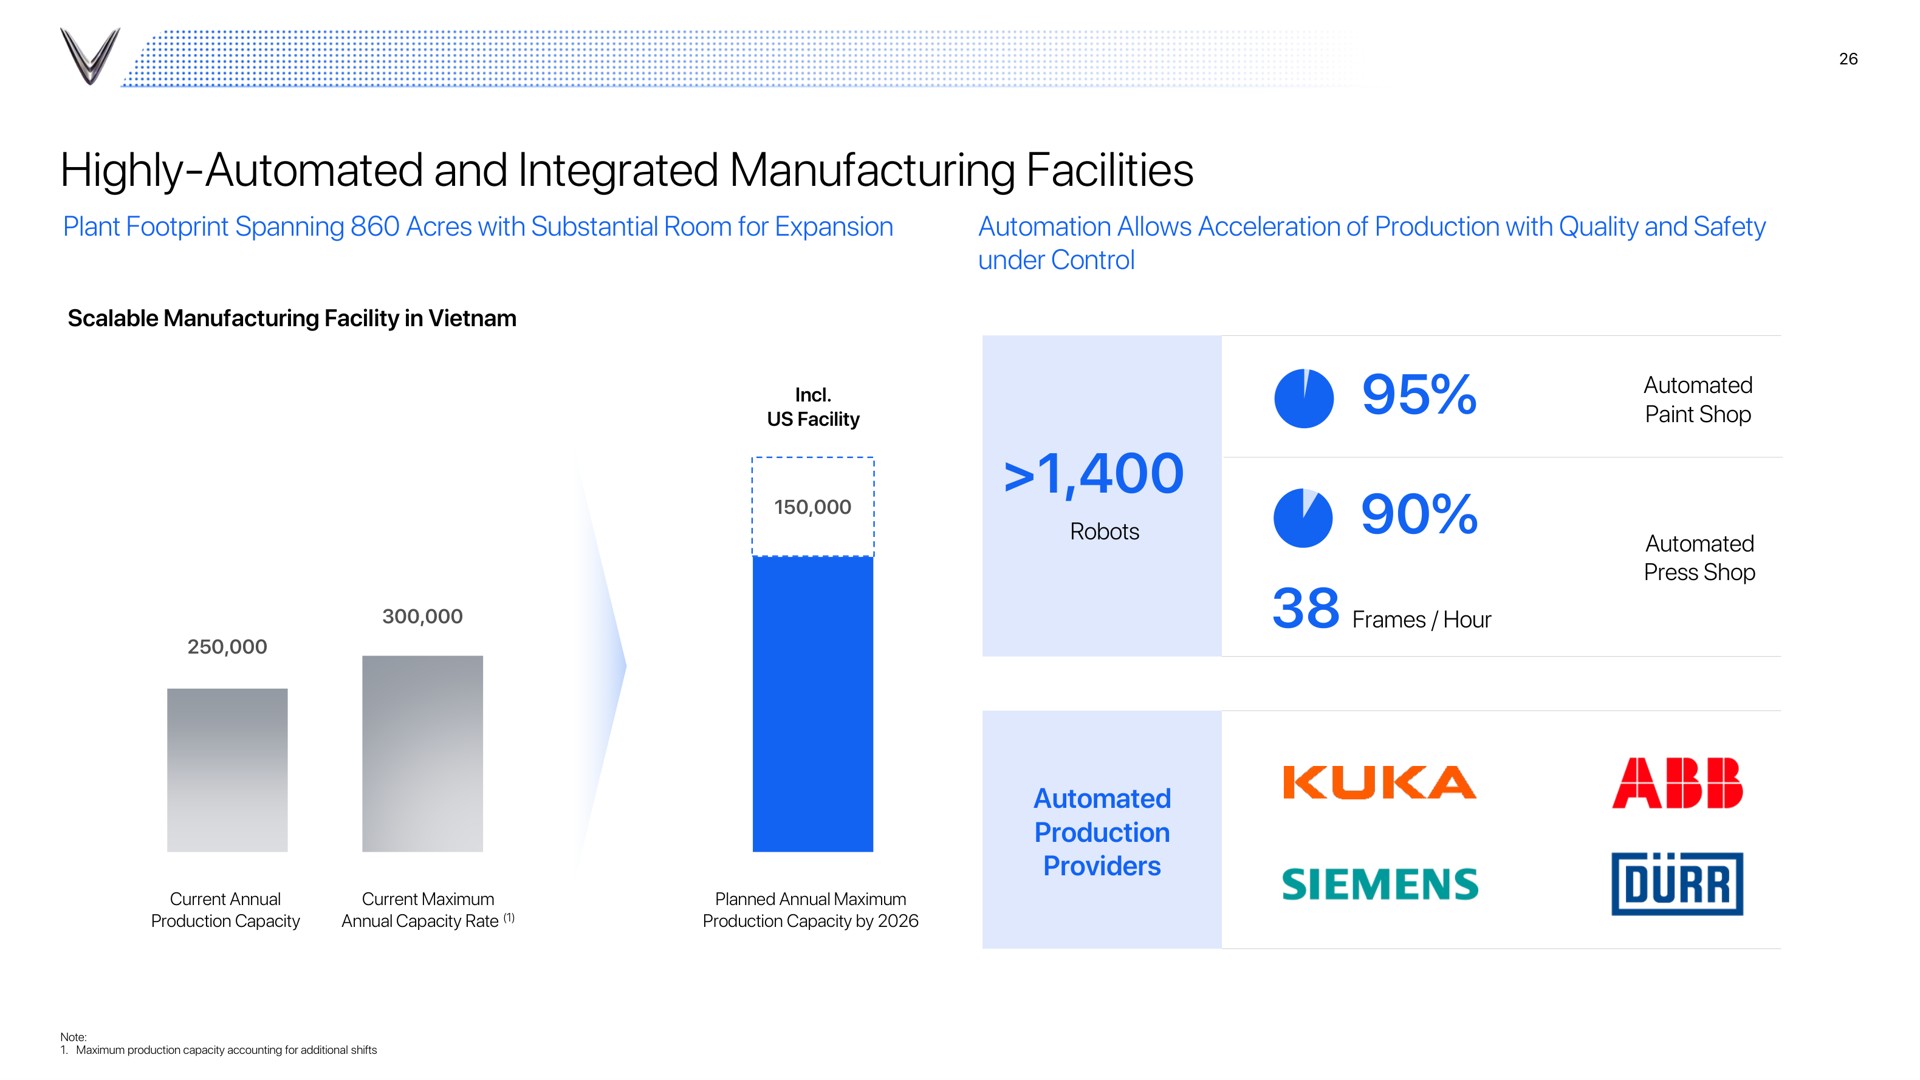 highly and integrated manufacturing facilities abb | VinFast